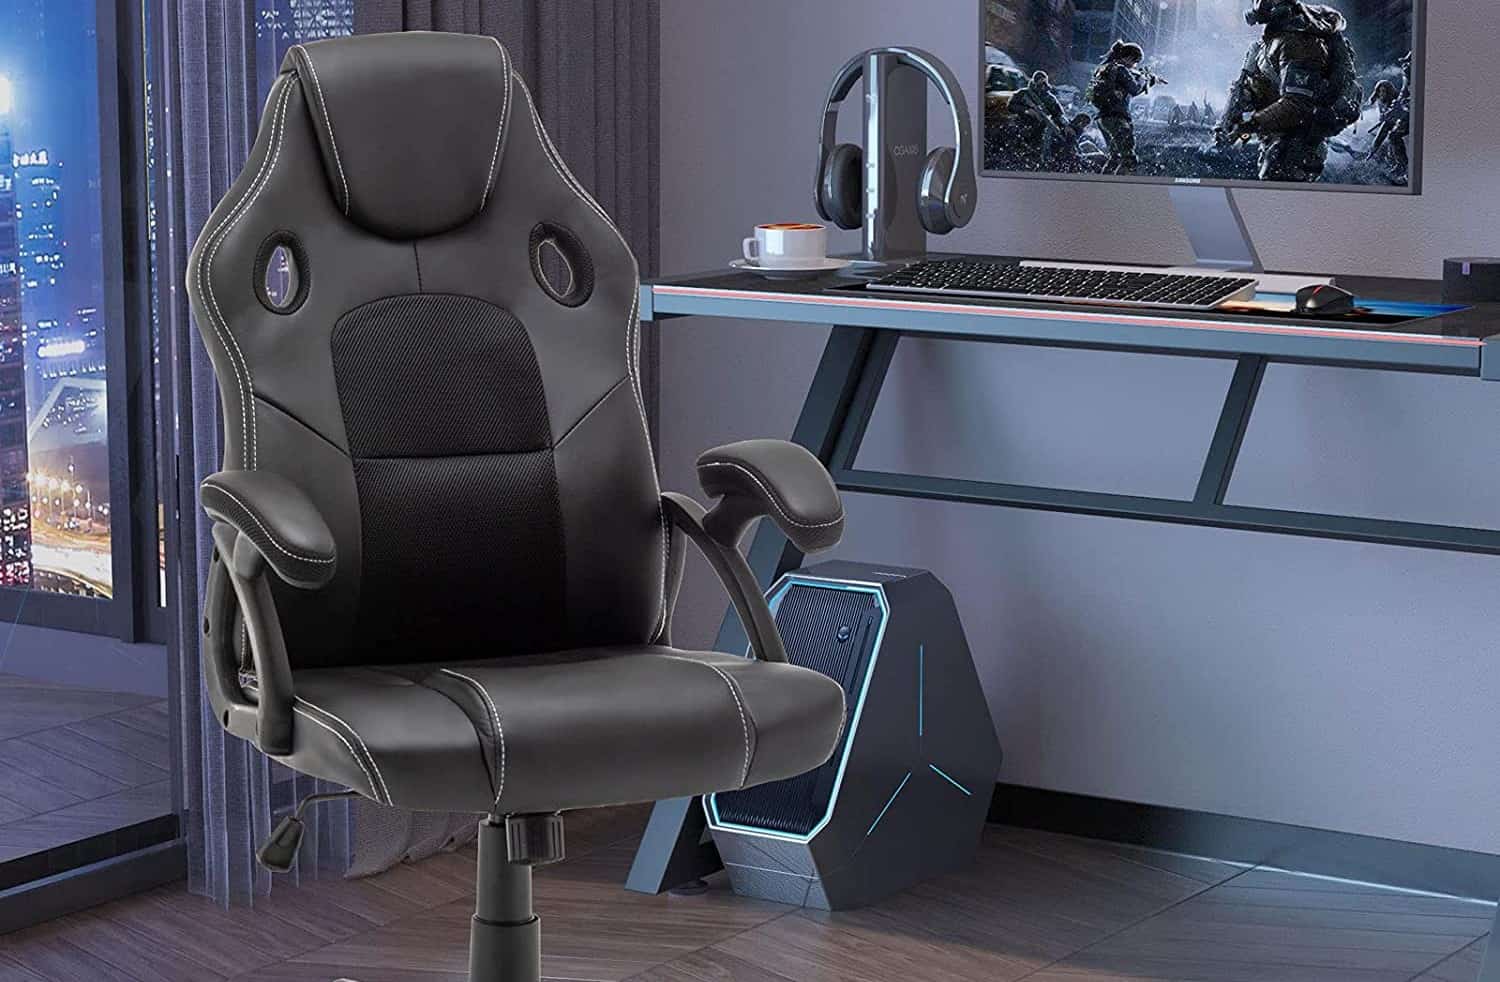 Best Xbox One Gaming Chairs in 2022